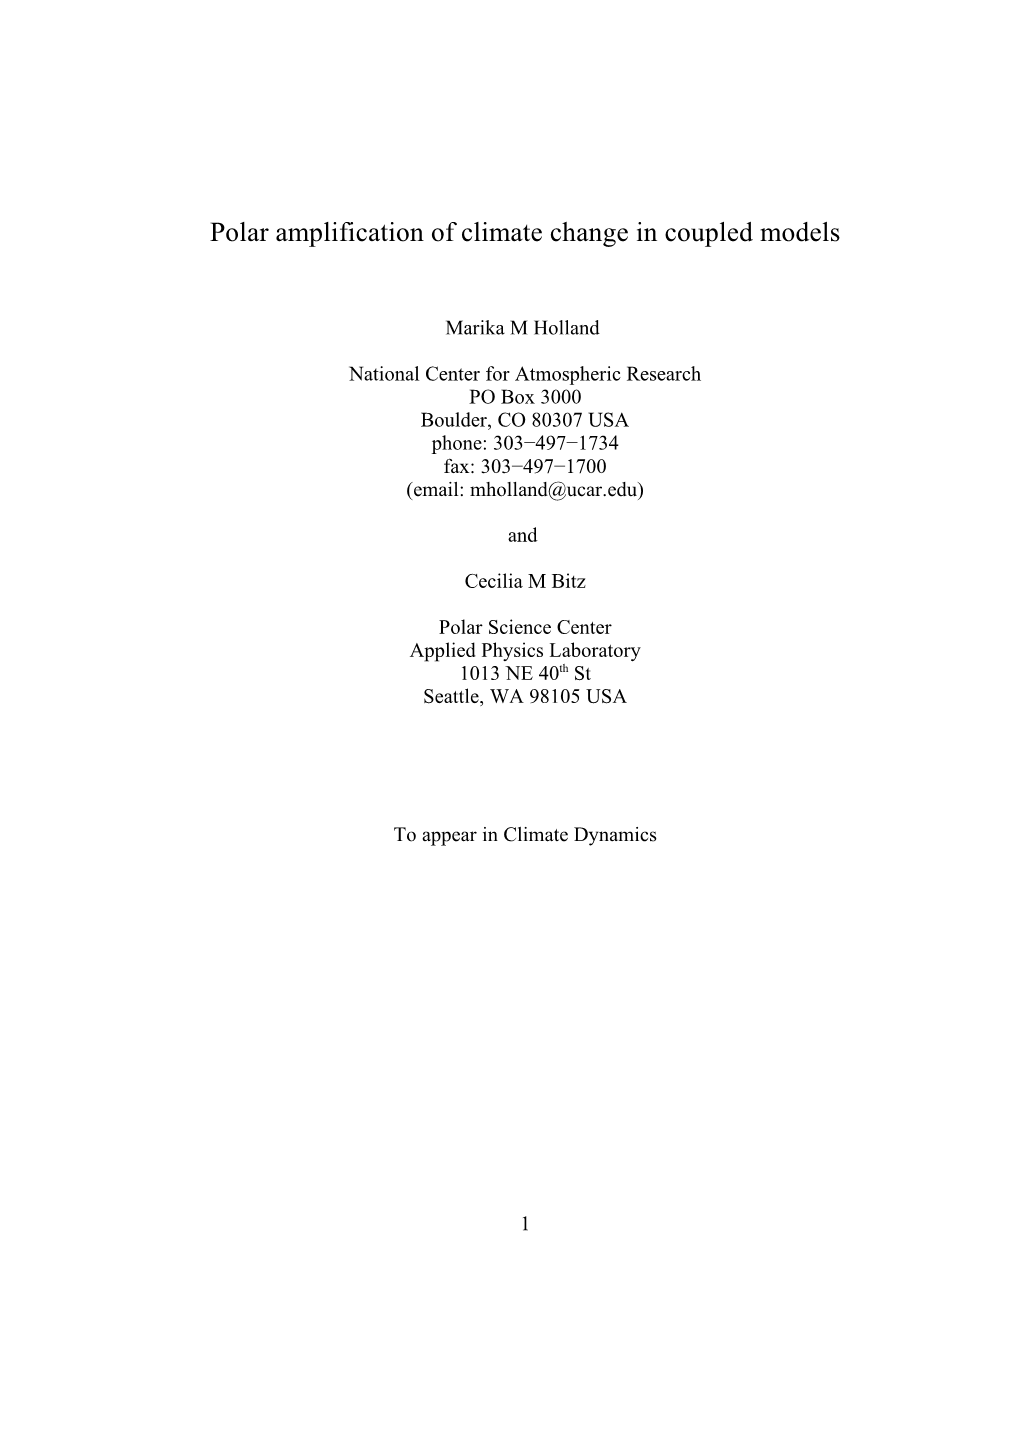 Polar Amplification of Climate Change in Coupled Models